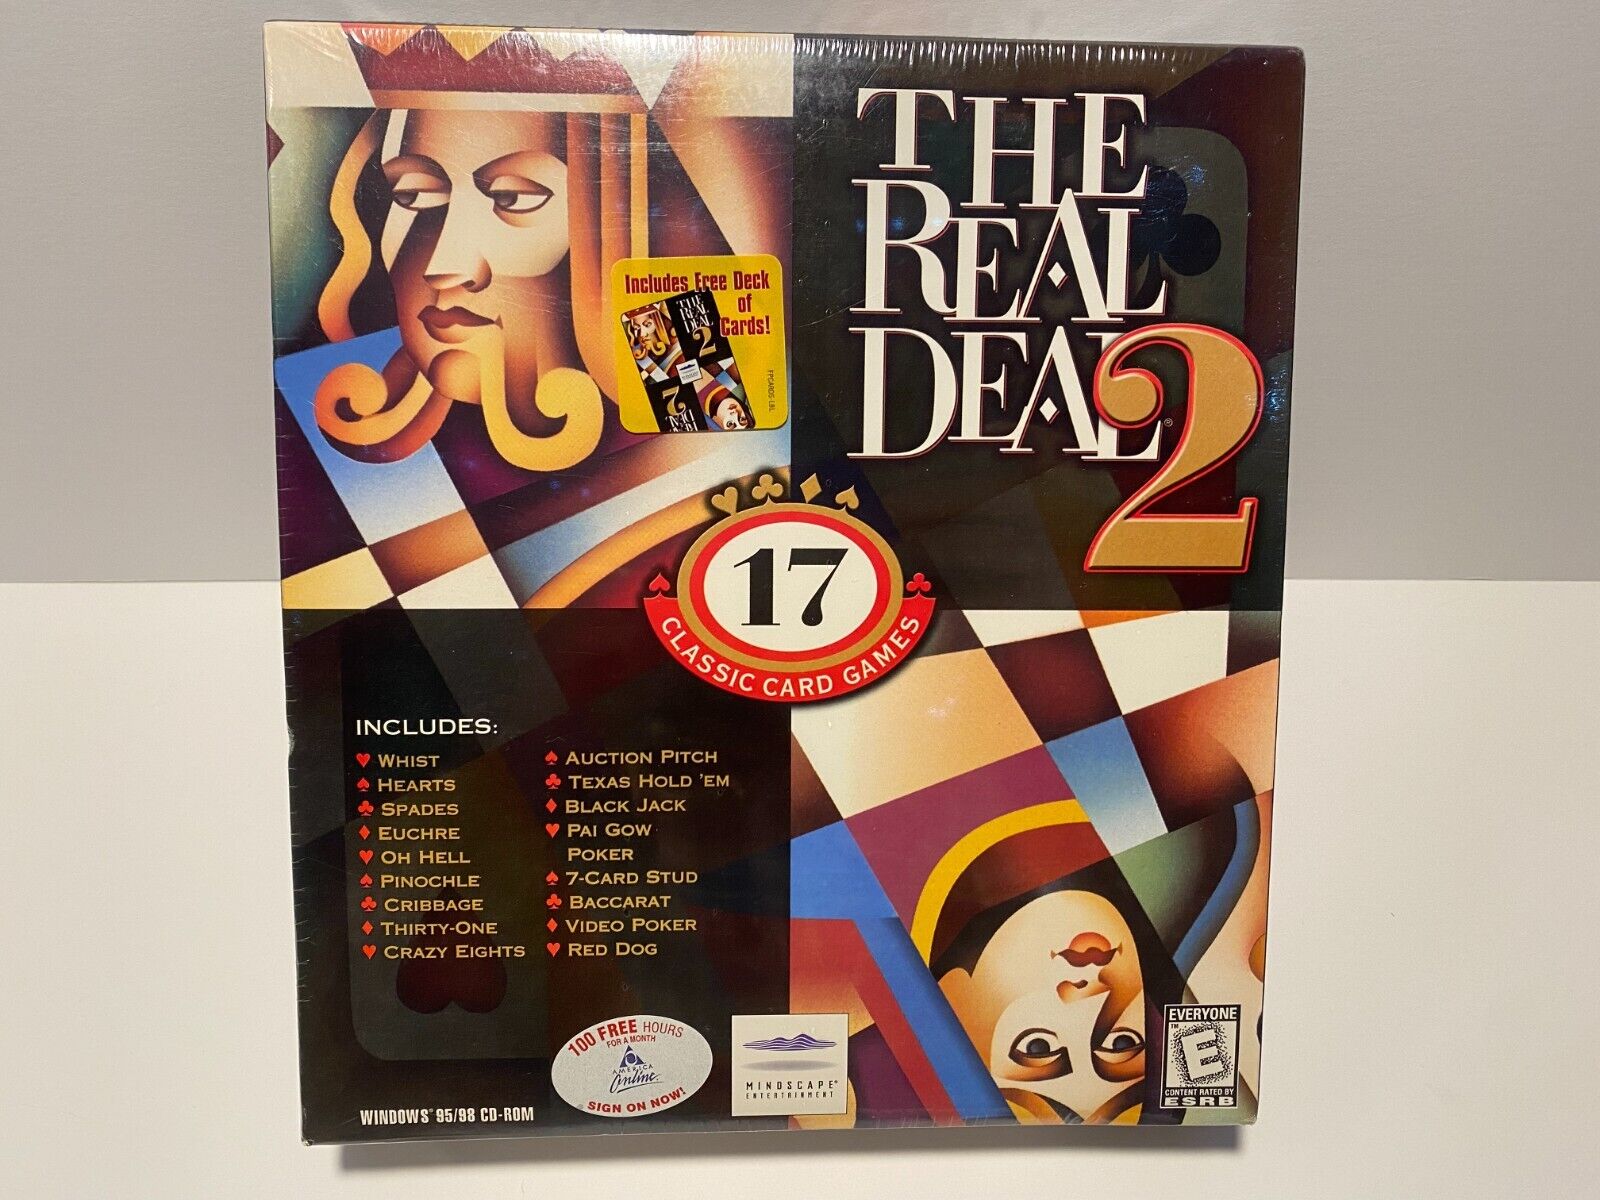 Sealed The Real Deal 2 - 17 Classic Card Games PC CD Mindscape Windows 95/98 BOX